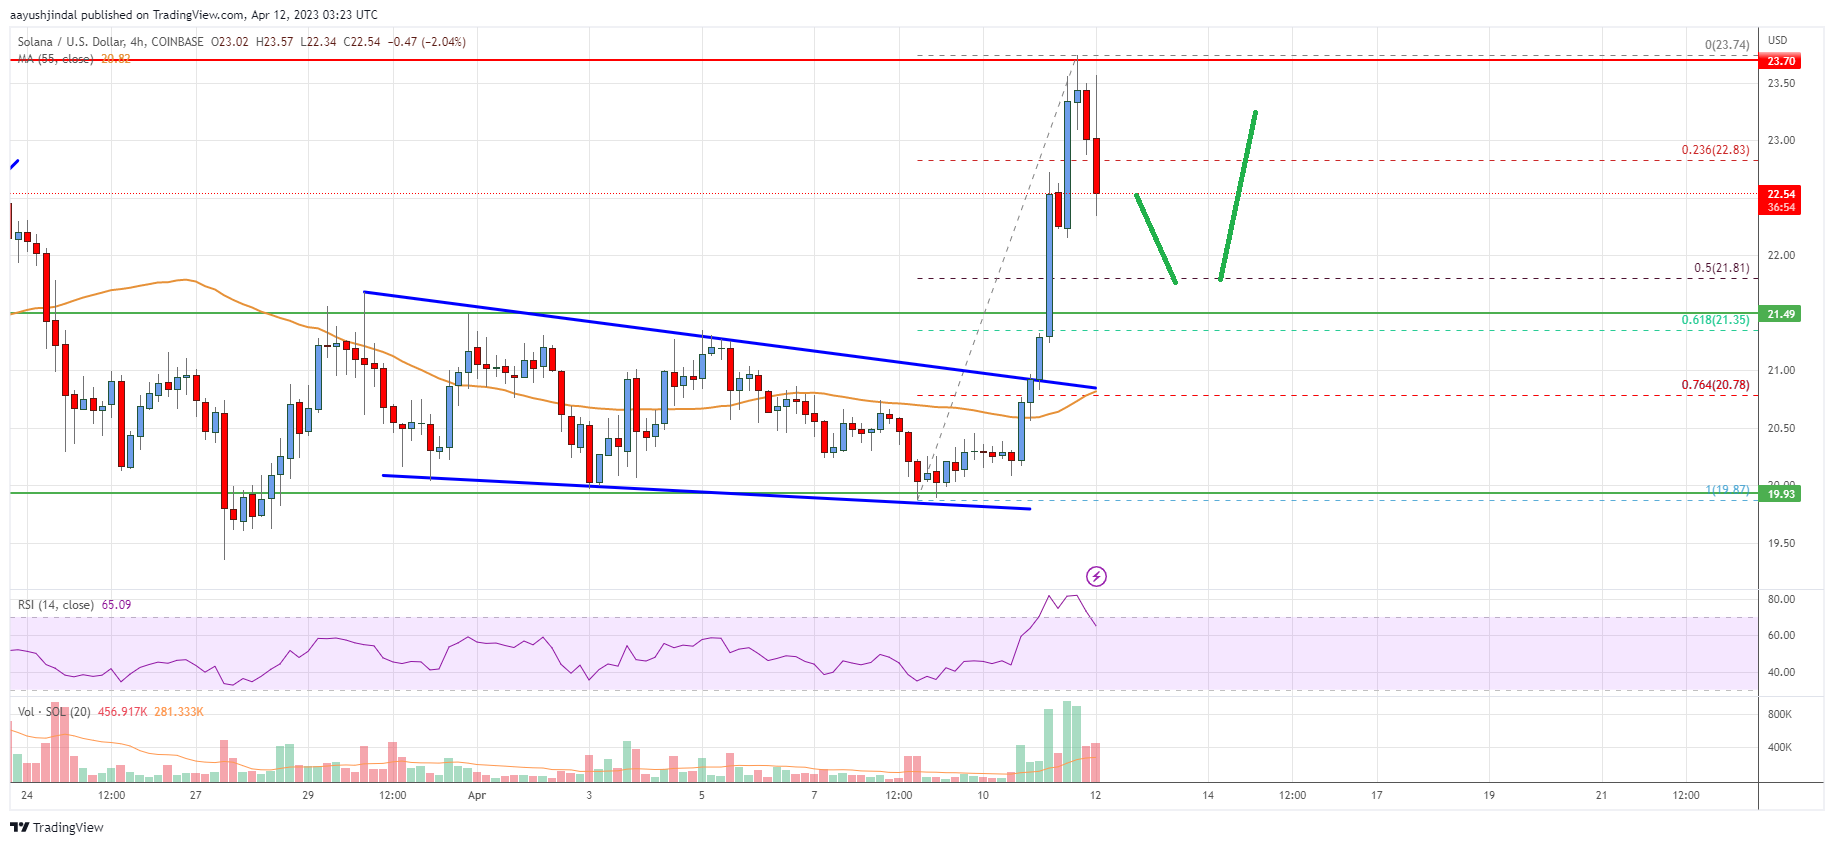 Solana (SOL) Price Analysis: Dips Turn Attractive Near $22